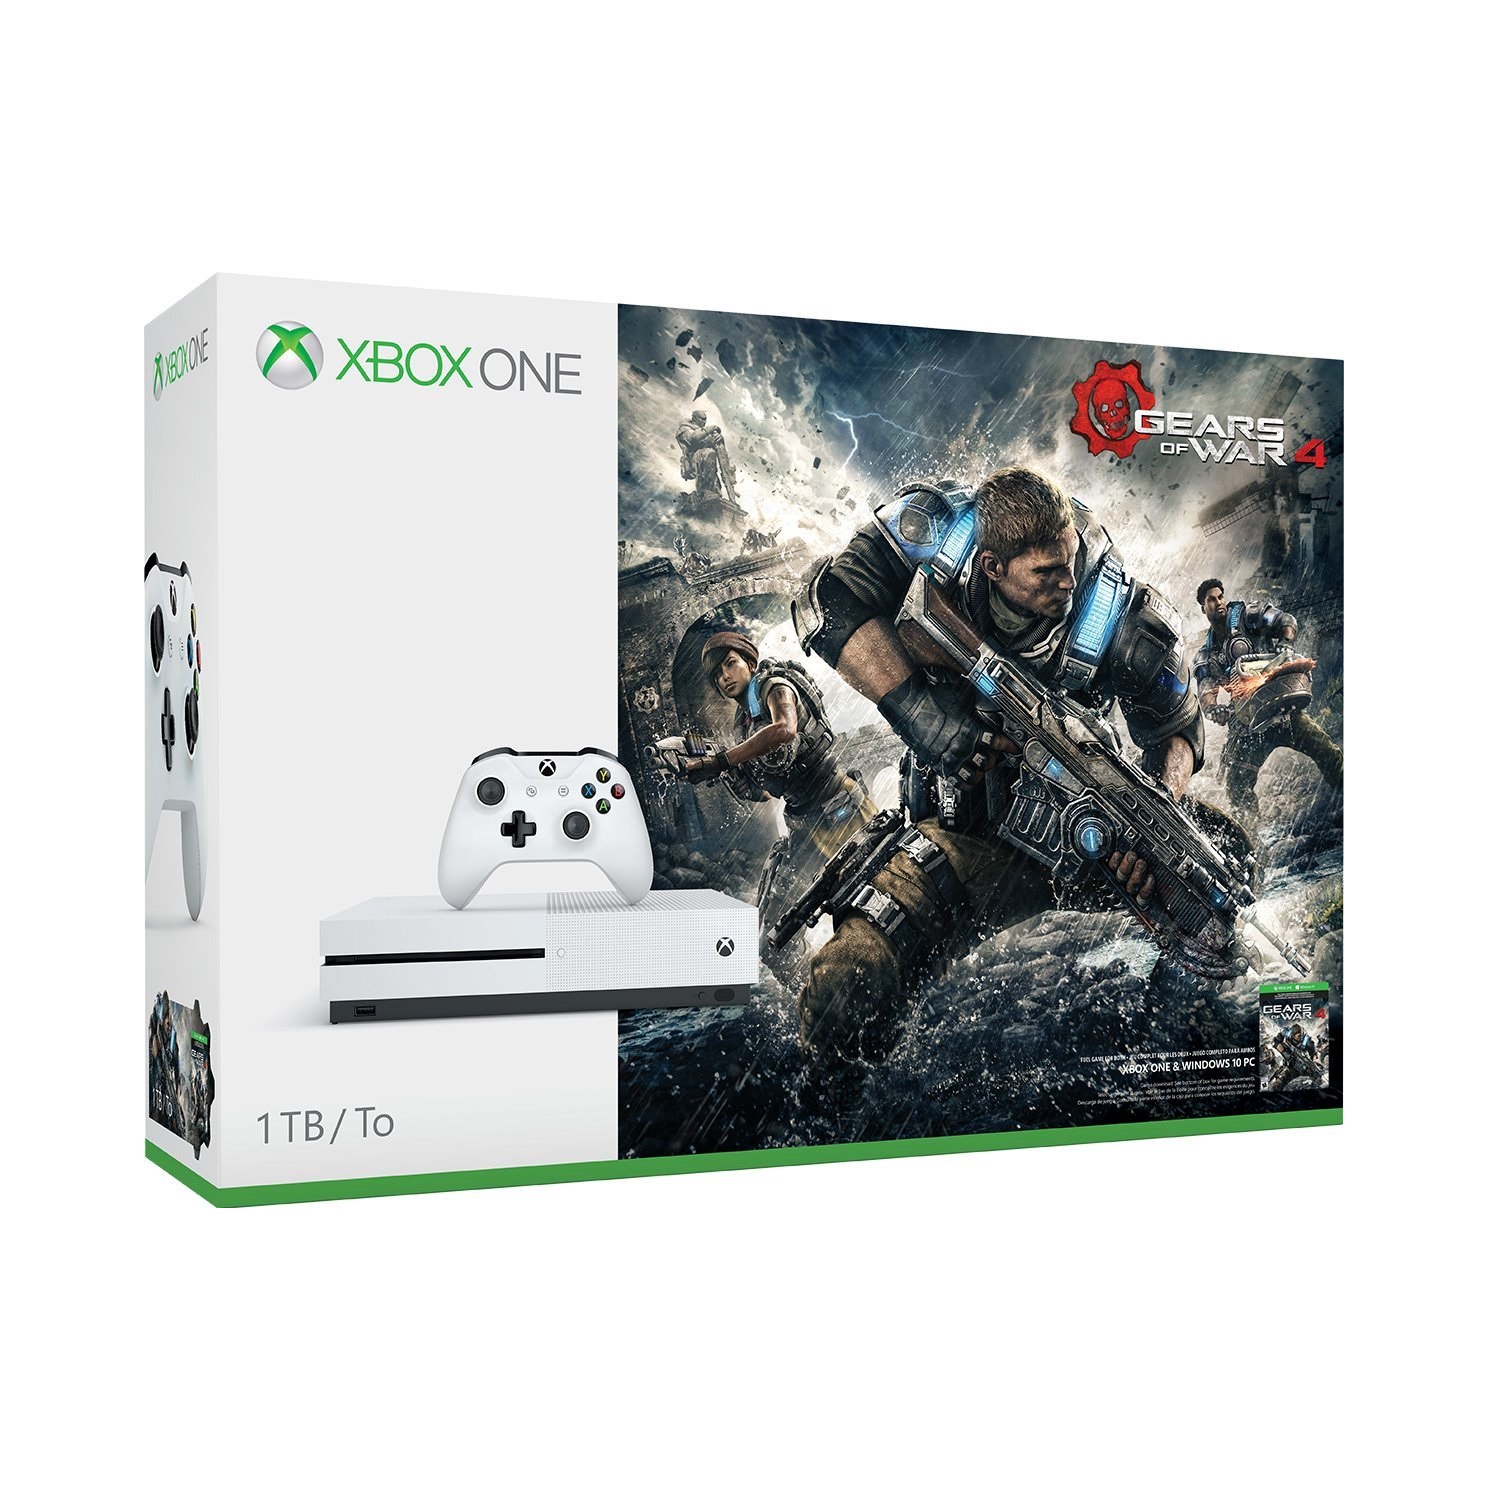 Xbox One S Gears of War 4 1 TB Bundle - image 1 of 8